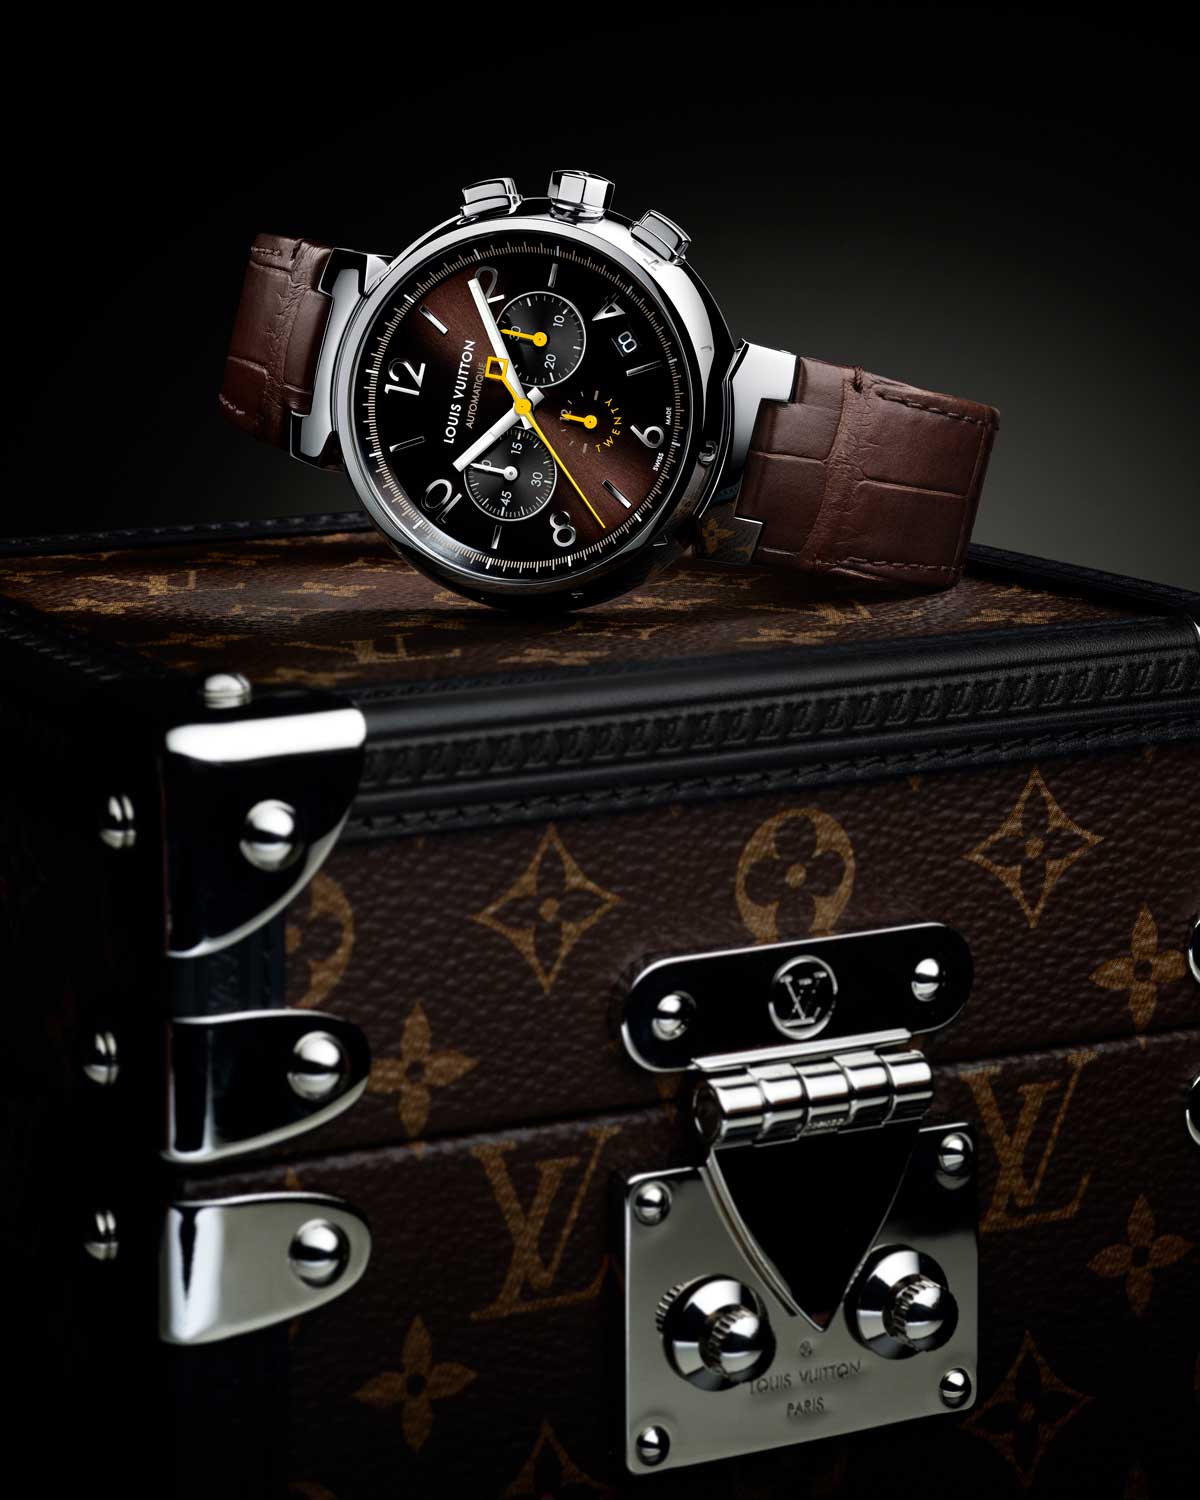 Tambour Twenty is presented in a Louis Vuitton miniature trunk with Monogram canvas as a tribute to the brand’s long history of serving clients during their travels